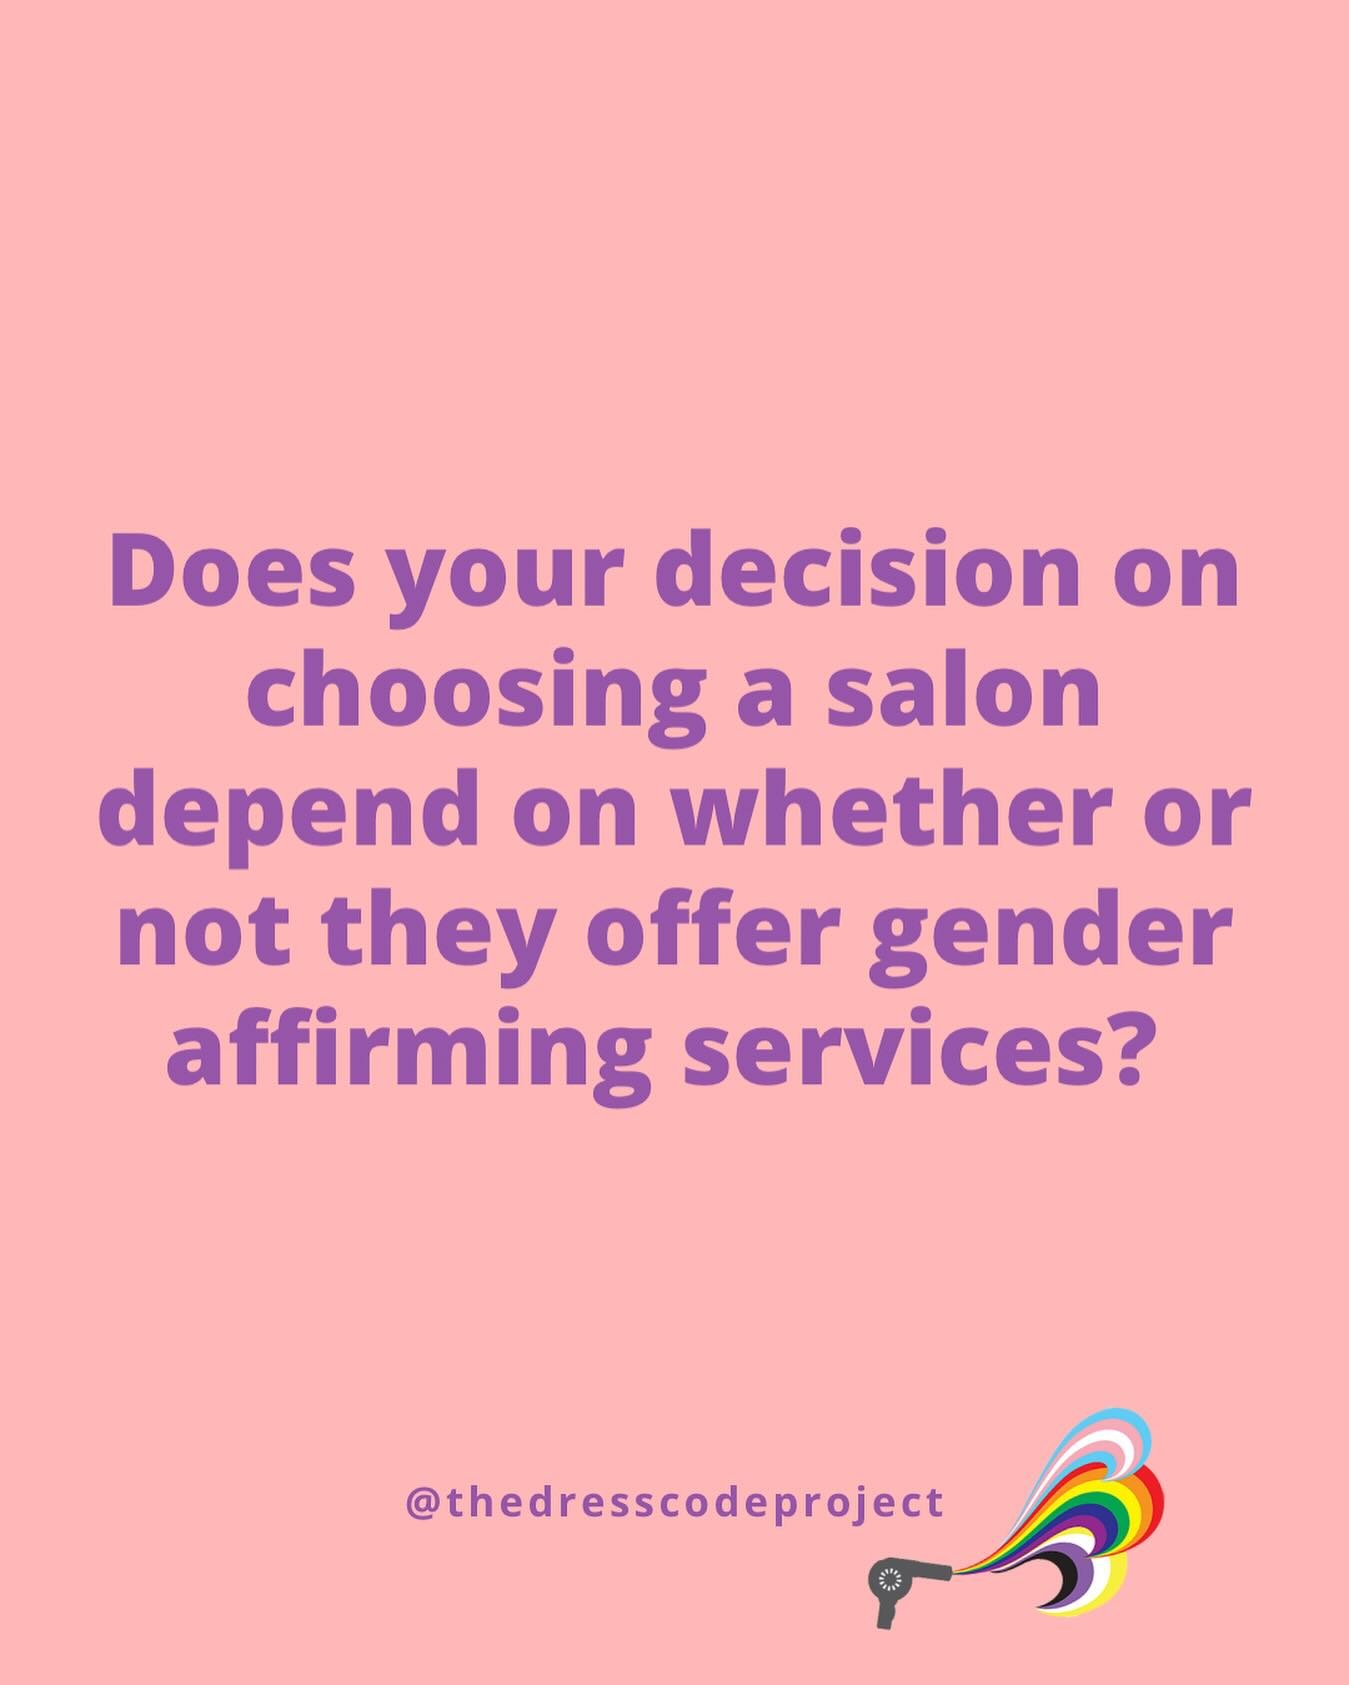 Let&rsquo;s discuss. Drop your thoughts in the comments below 👇🏽

#genderfreehaircutclub #dresscodeproject